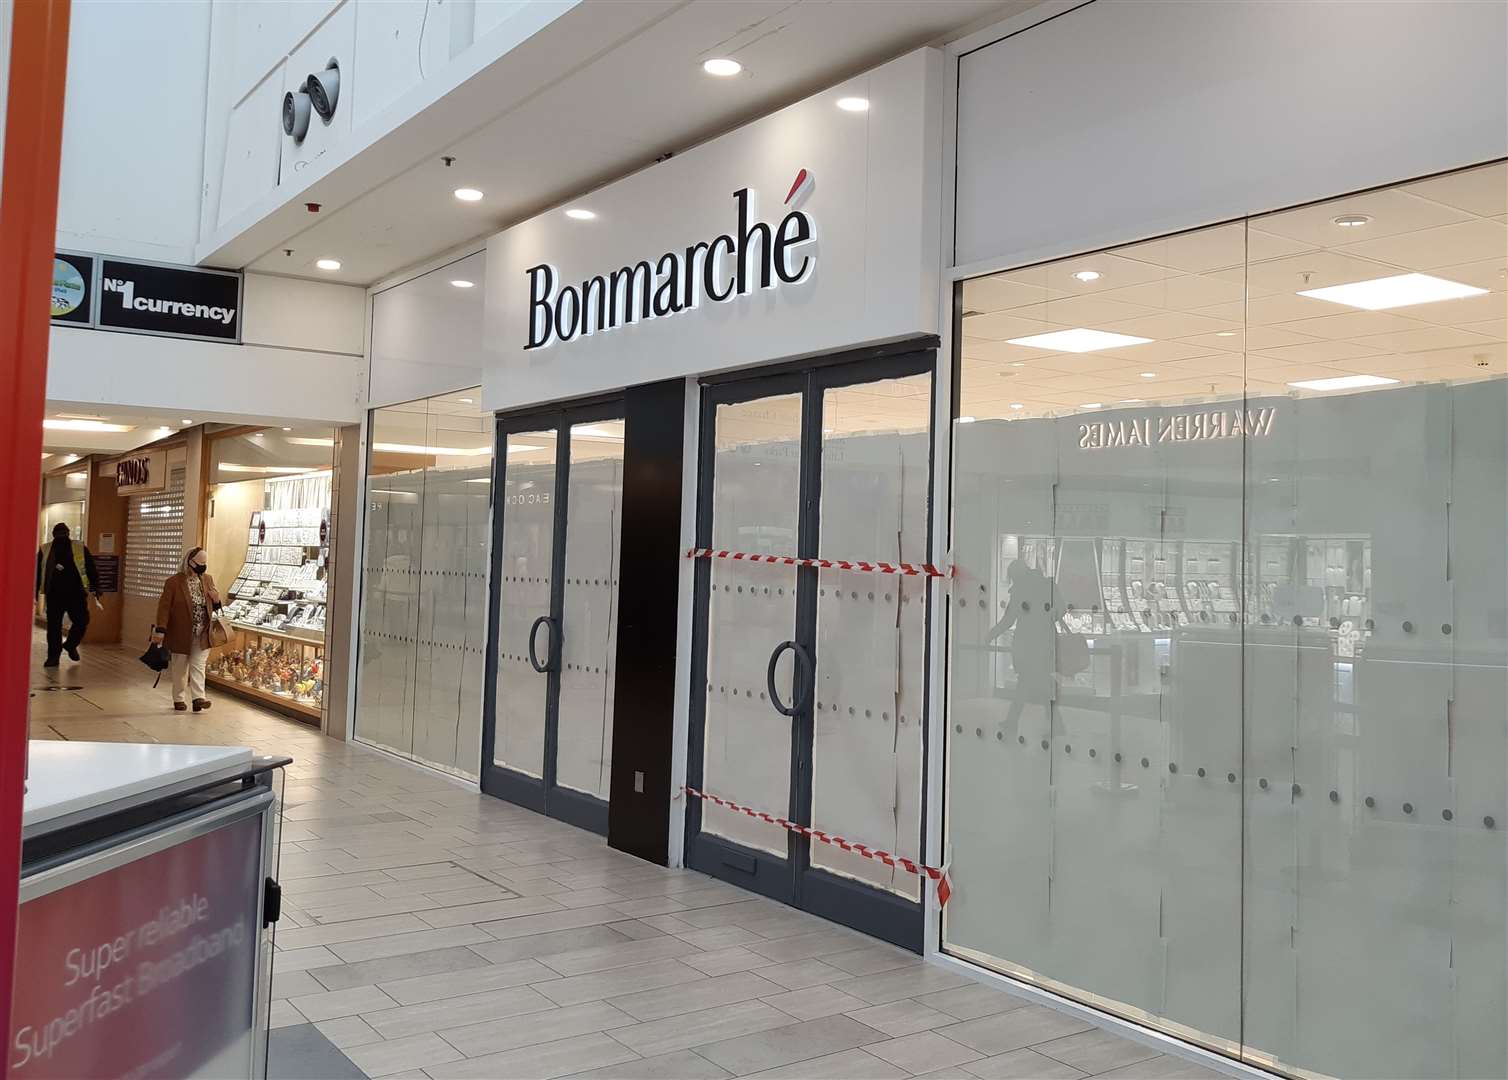 The former Bonmarche store in Ashford is to become a card shop